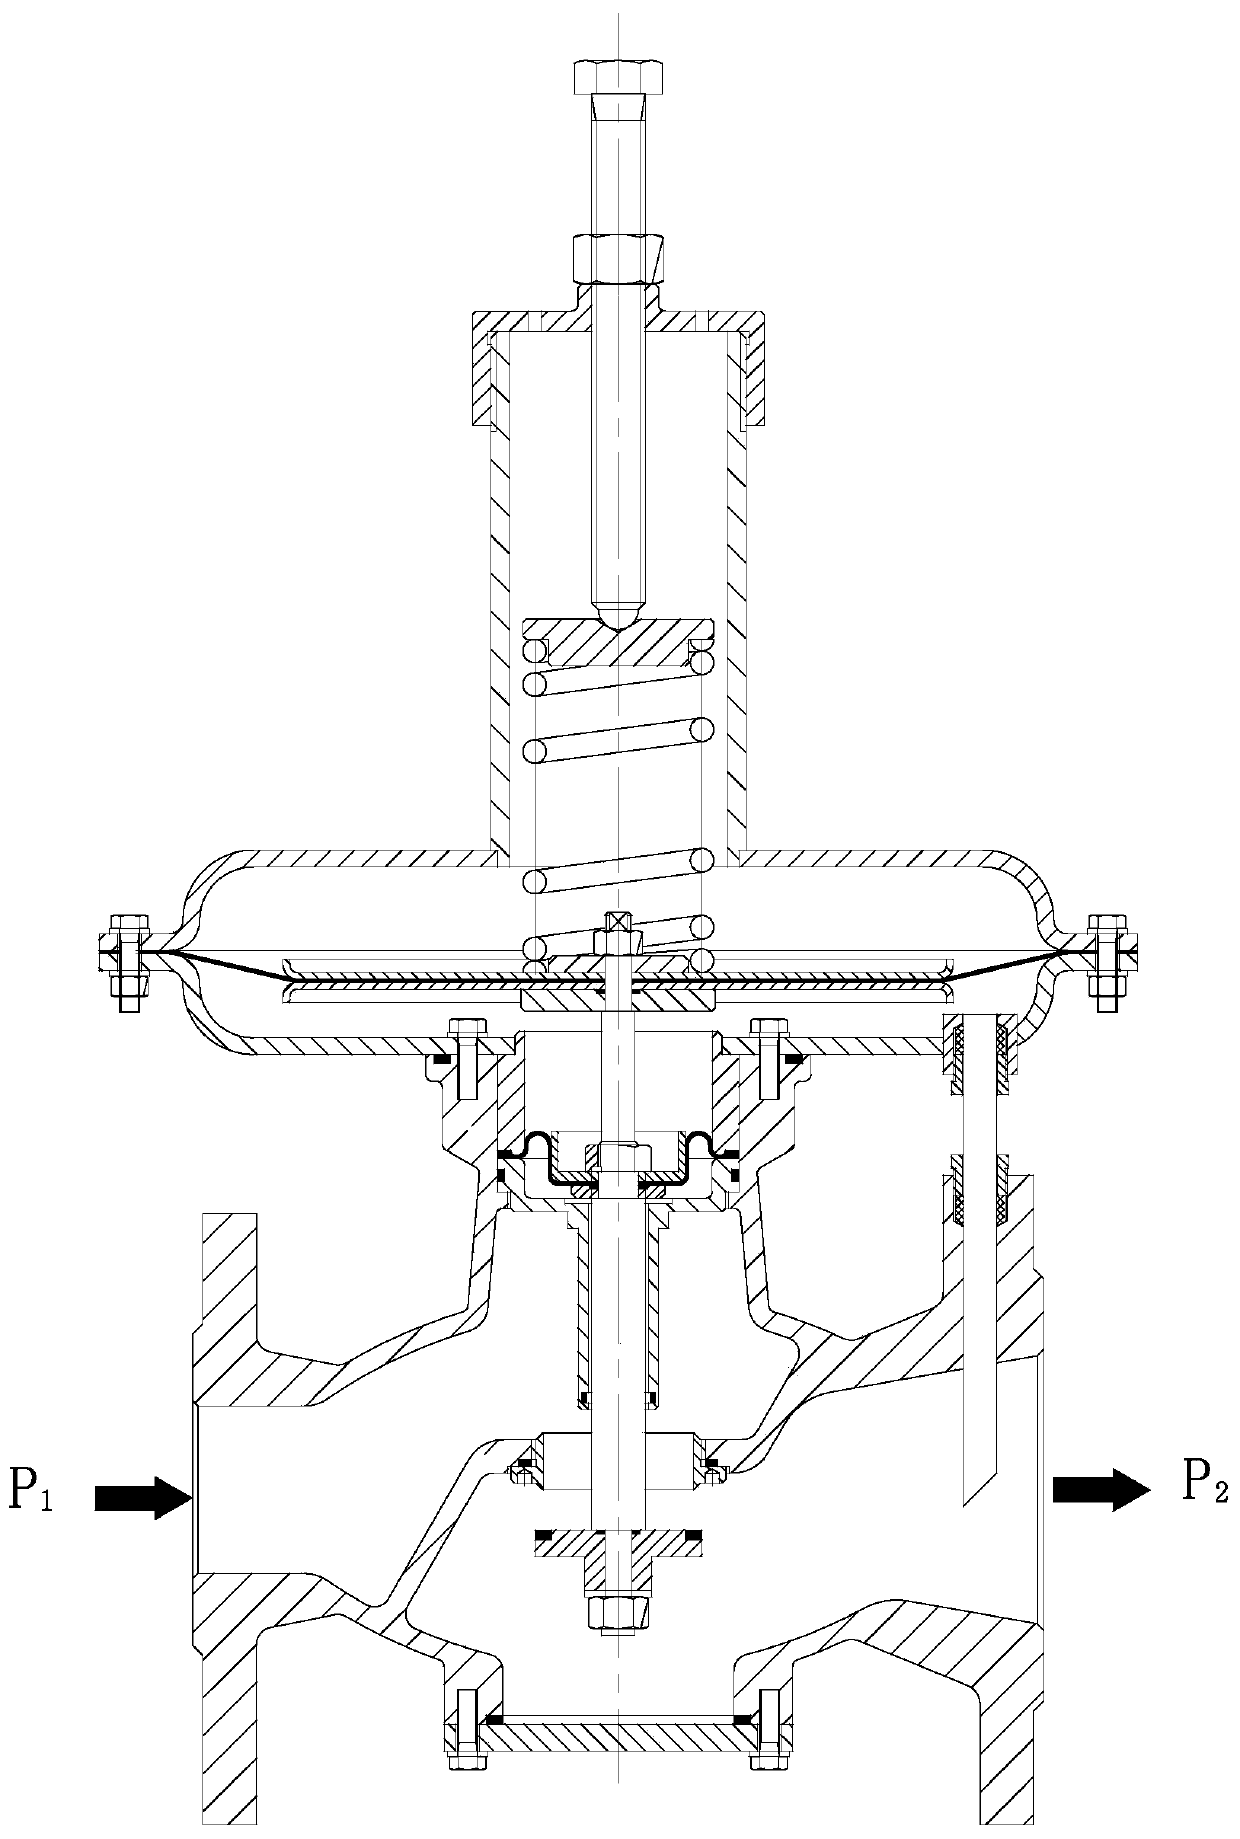 Direct-acting type pressure regulator for compensating for spring effect